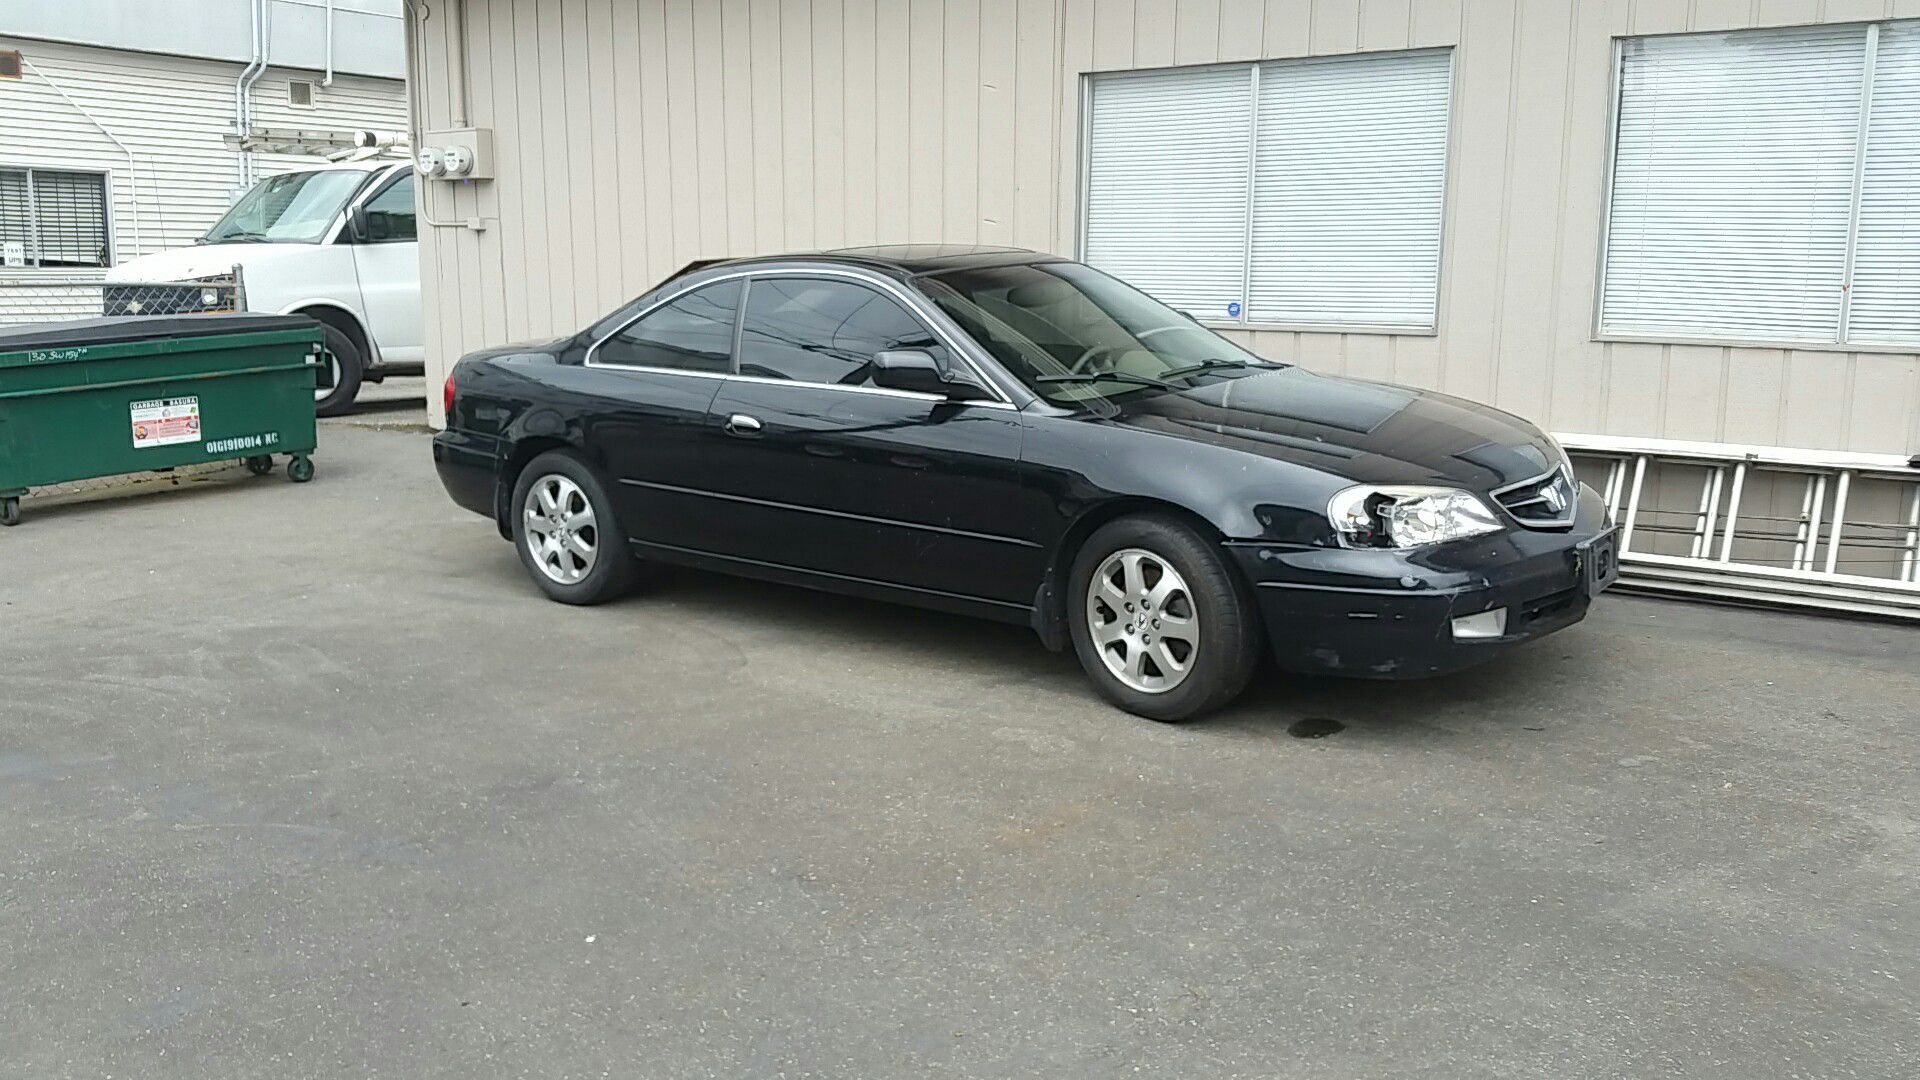 00 Acura CL parts car (make an offer)